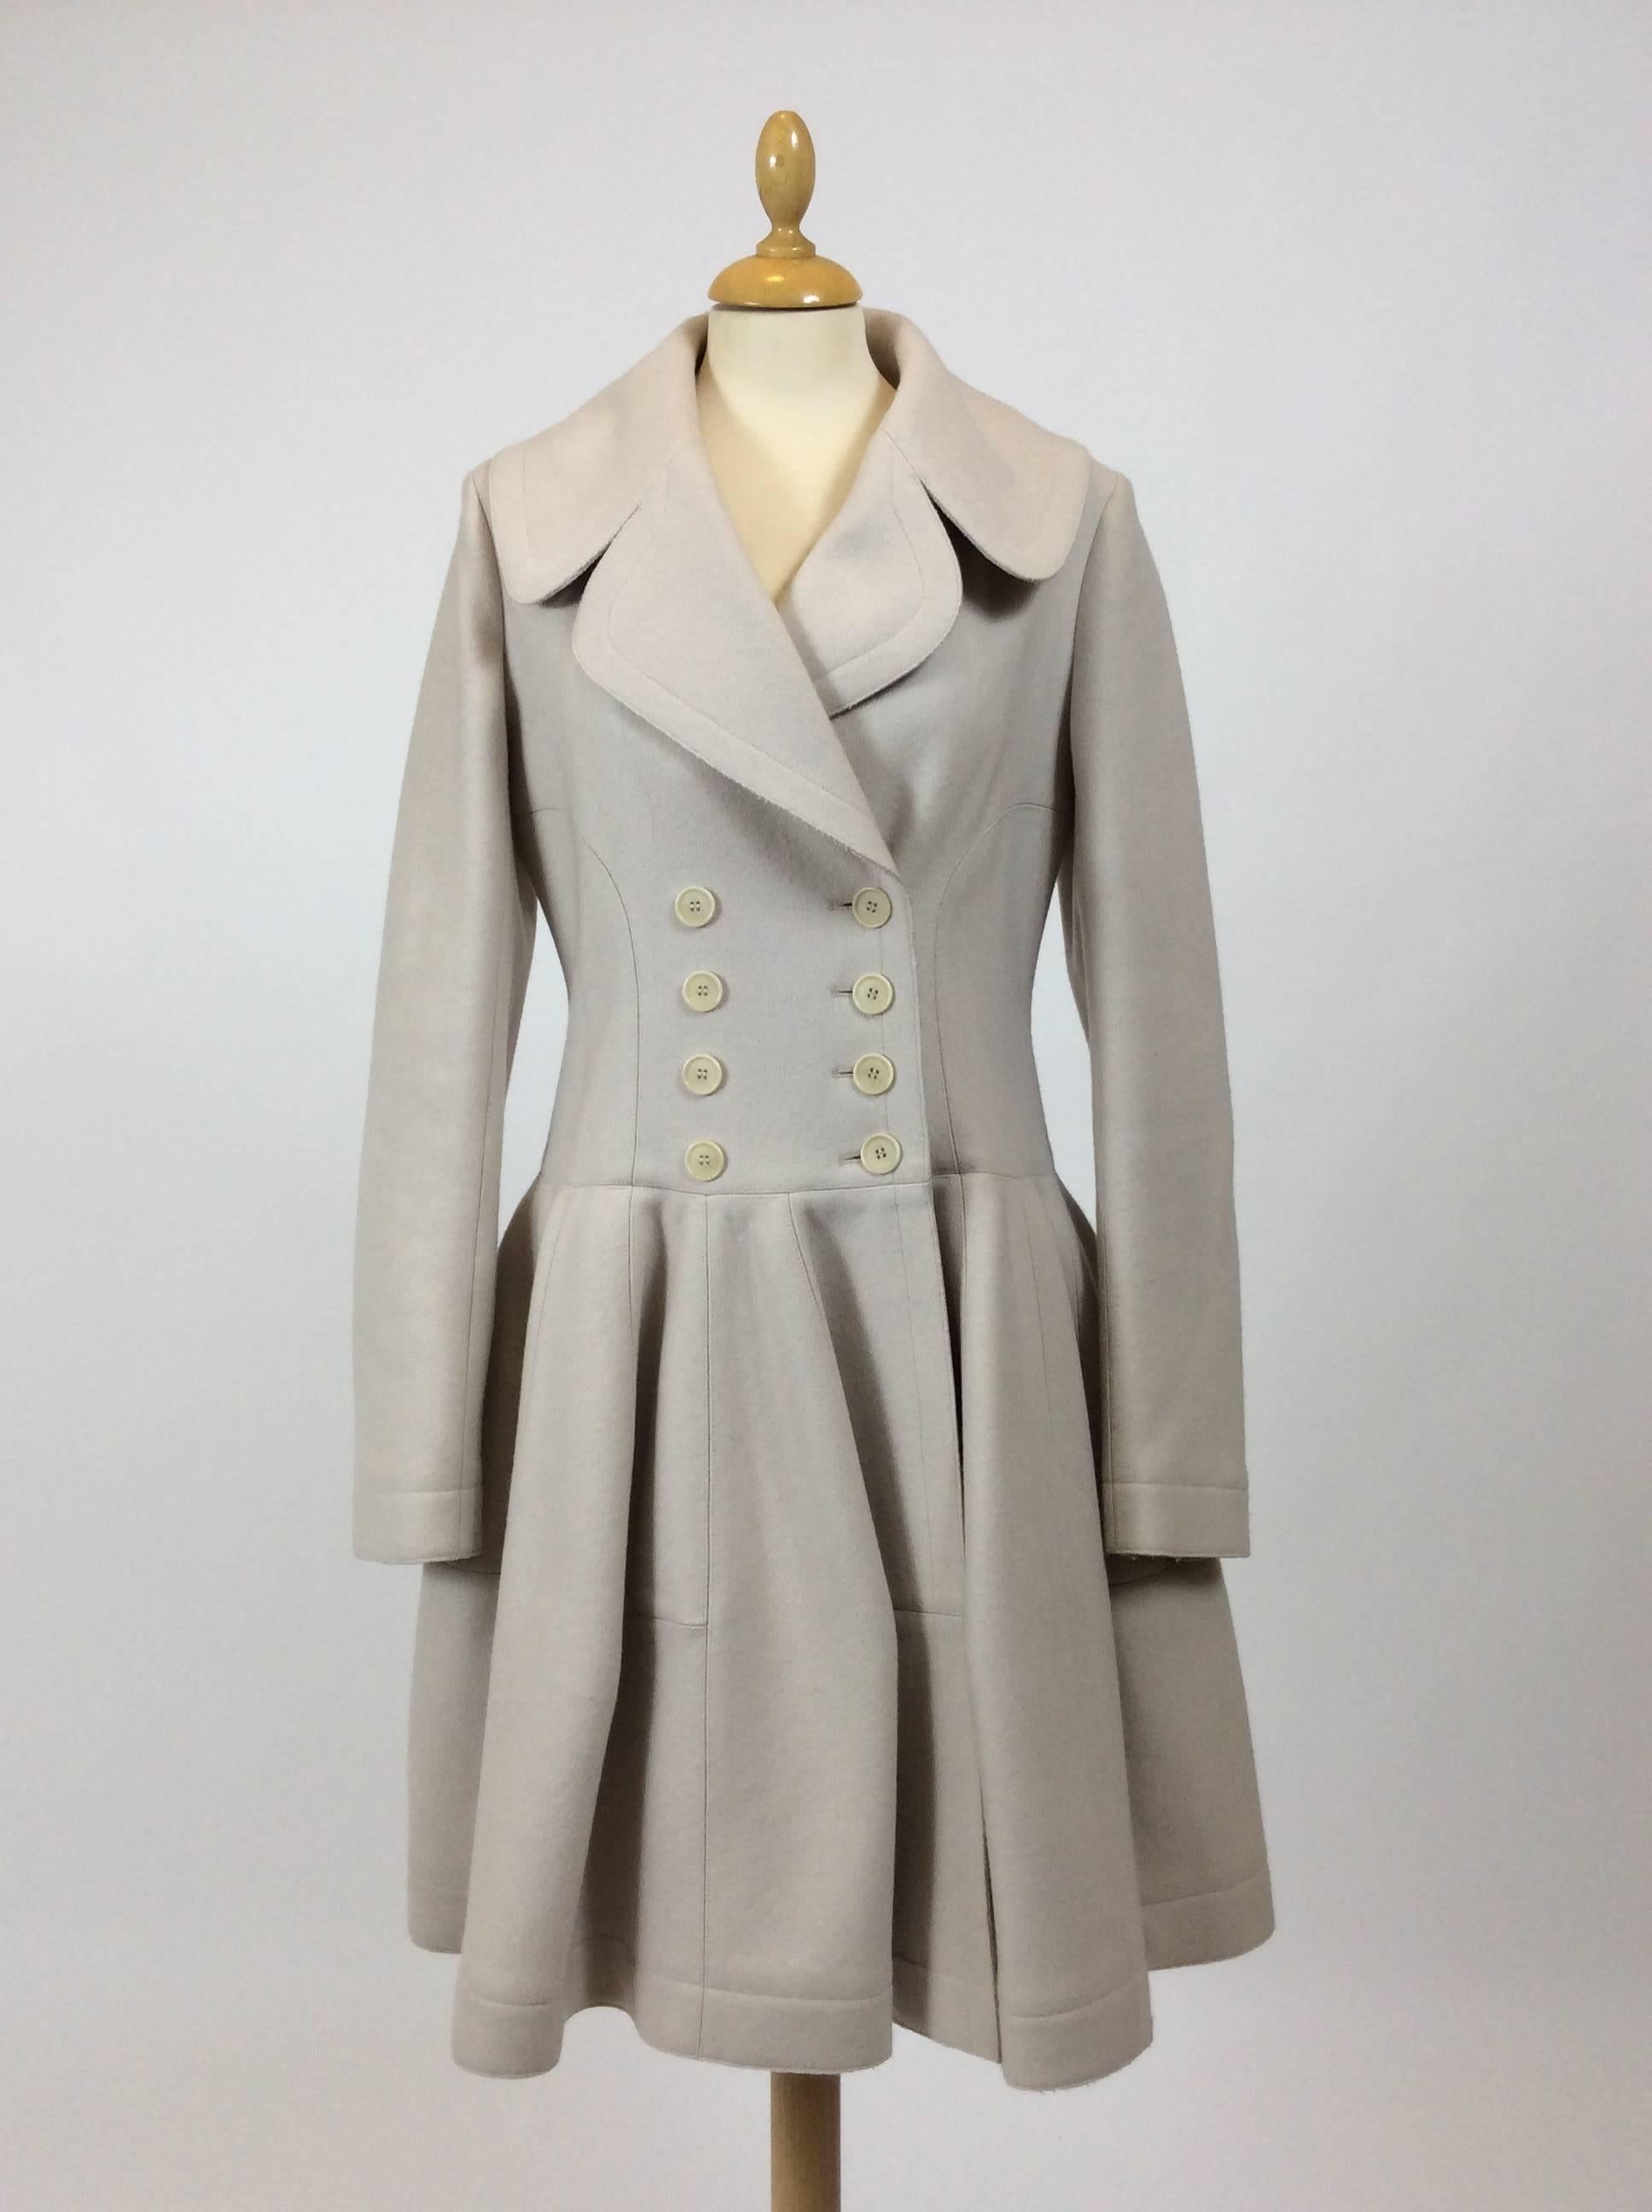 This gorgeous Azzedine Alaïa coat is in a cream cashmere fabric and has typical Alaia's signature line. It has double breasted buttons closure, pink satin lined and pleateds skirt.

Measurements:
Label size 40
Estimated size S/M
Shoulder 15